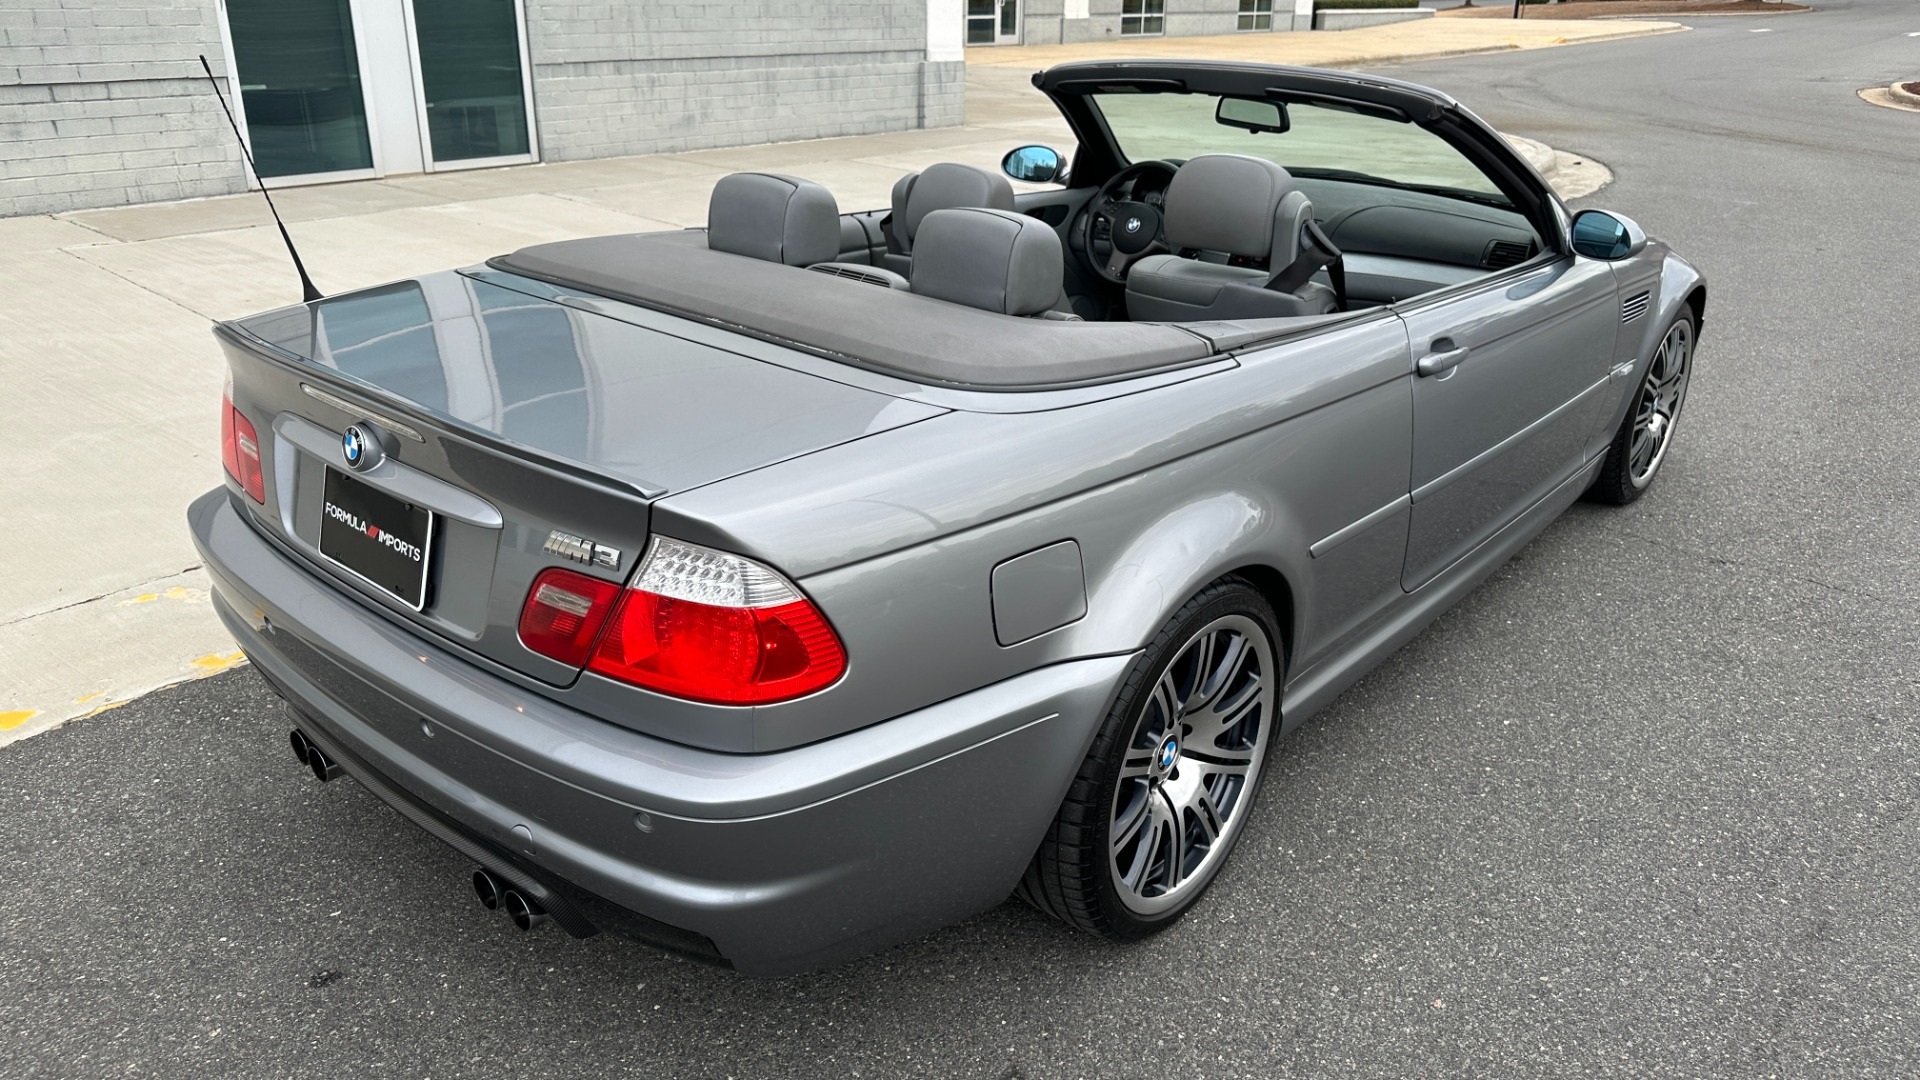 Used 2006 BMW M3 CONVERTIBLE / SMG AUTO / LEATHER / INLINE 6CYL / CARBON FIBER for sale $24,995 at Formula Imports in Charlotte NC 28227 4